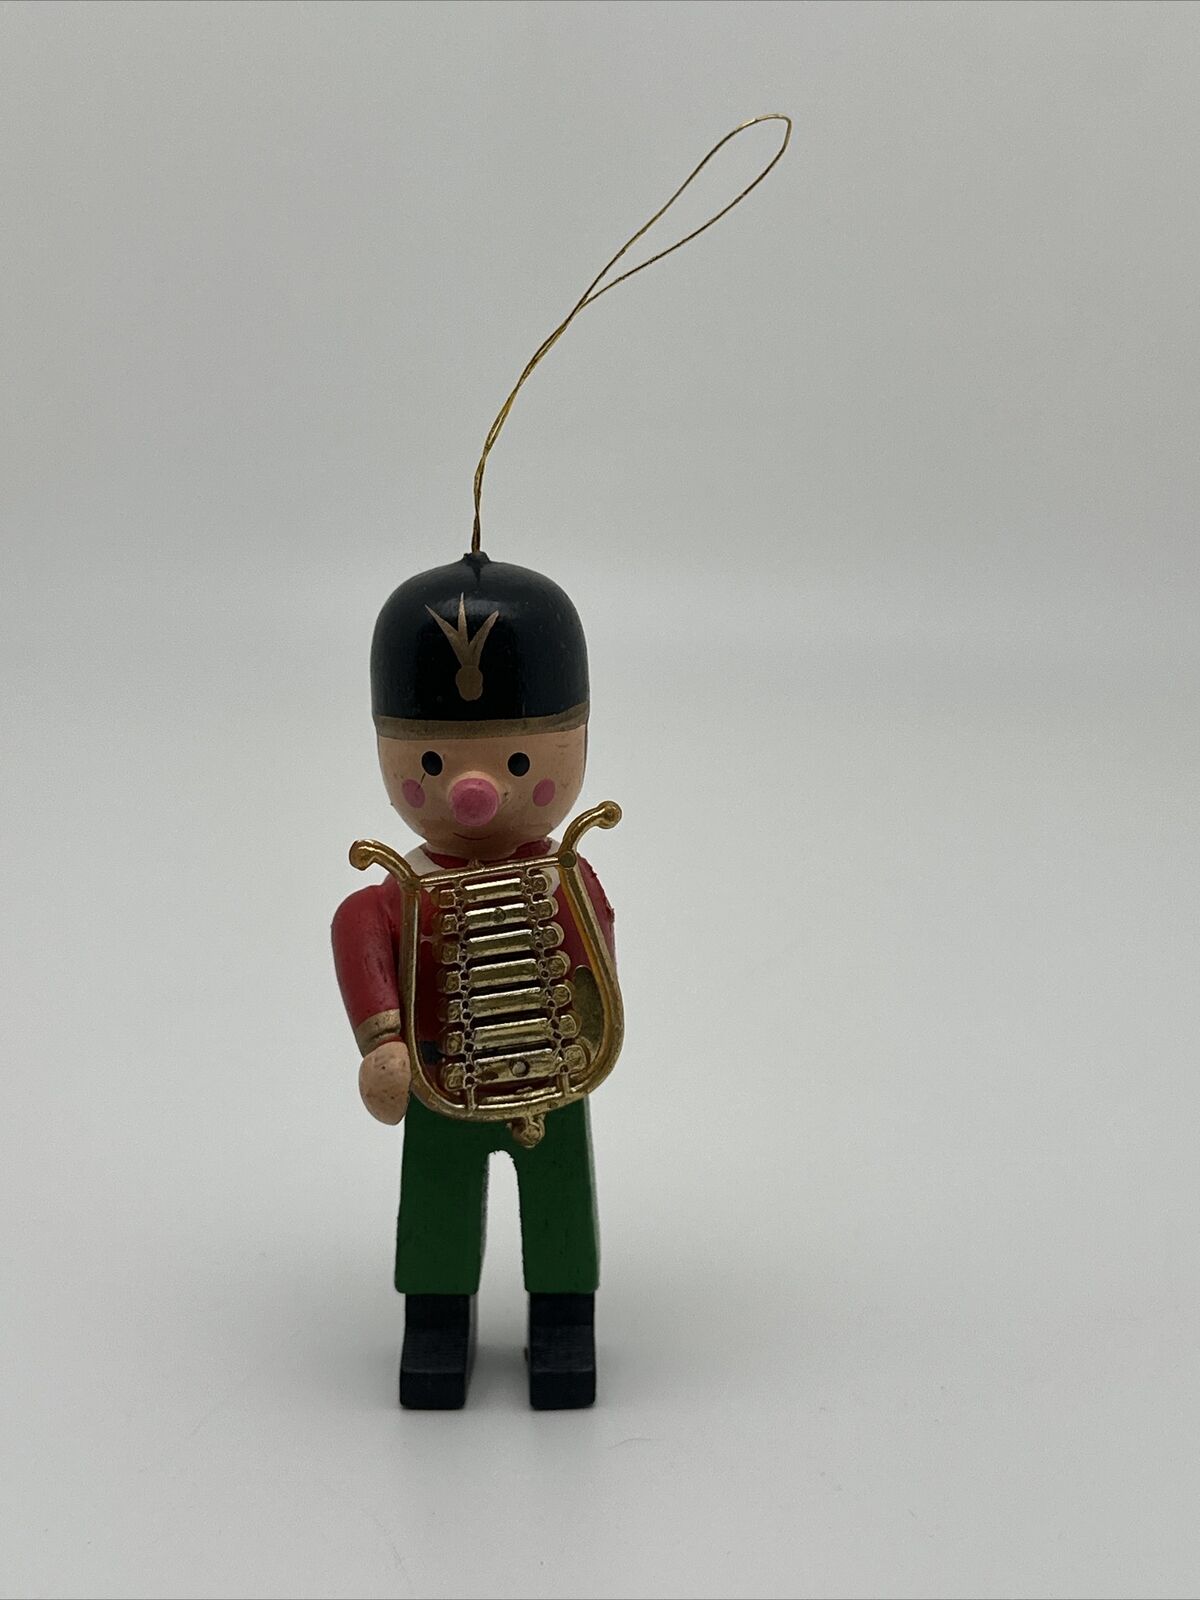 VTG 1970’s Drummer Boy Marching Band Wooden Christmas Tree Ornament…97